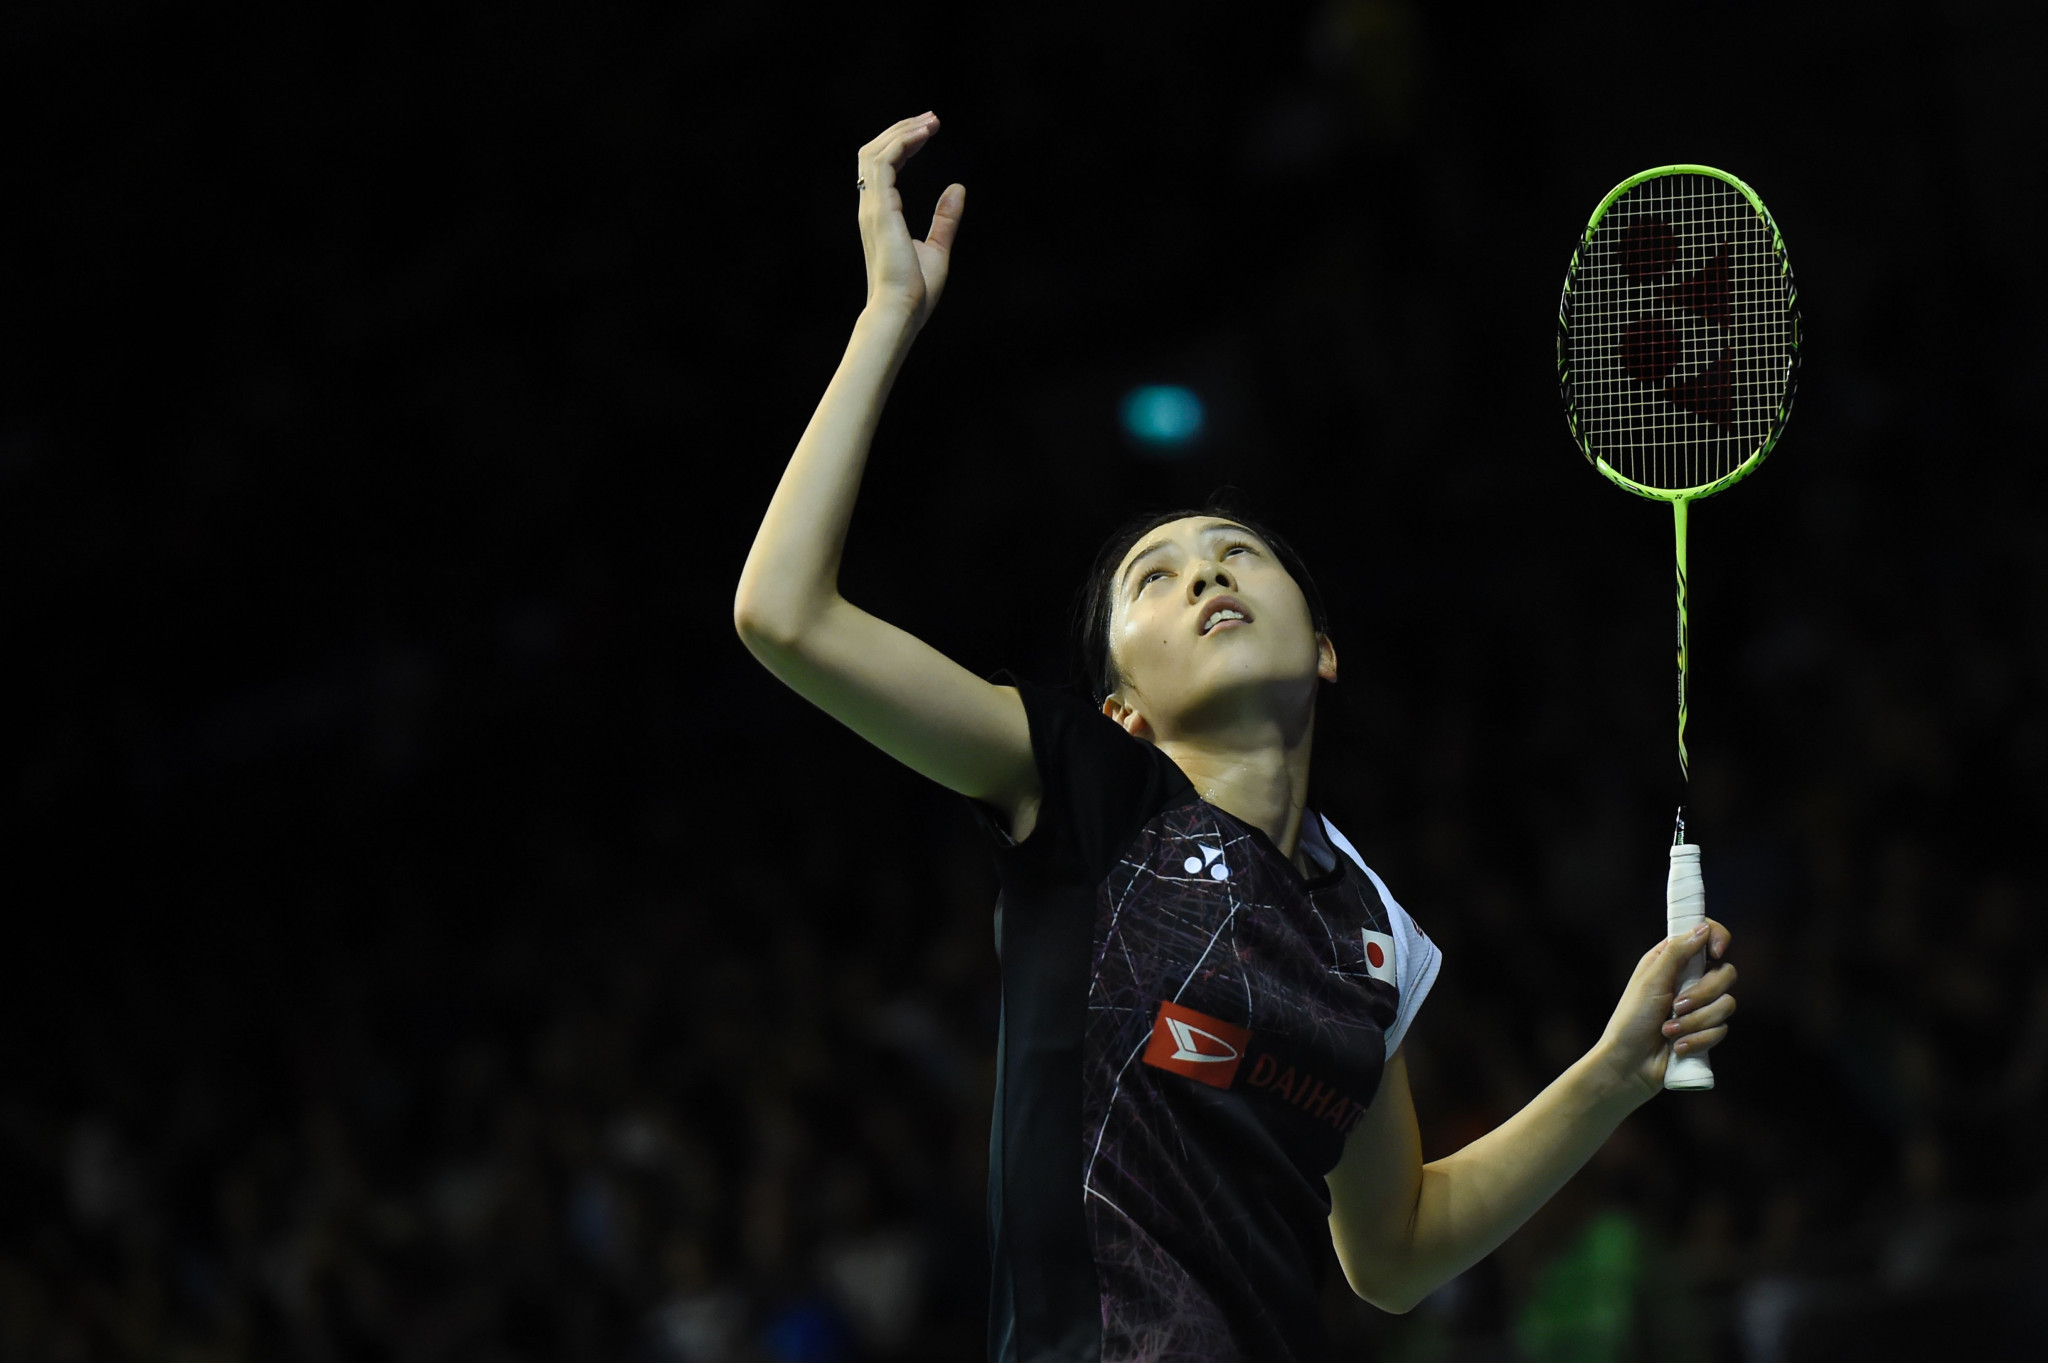 Ohori marches on with dominant win at BWF Macau Open